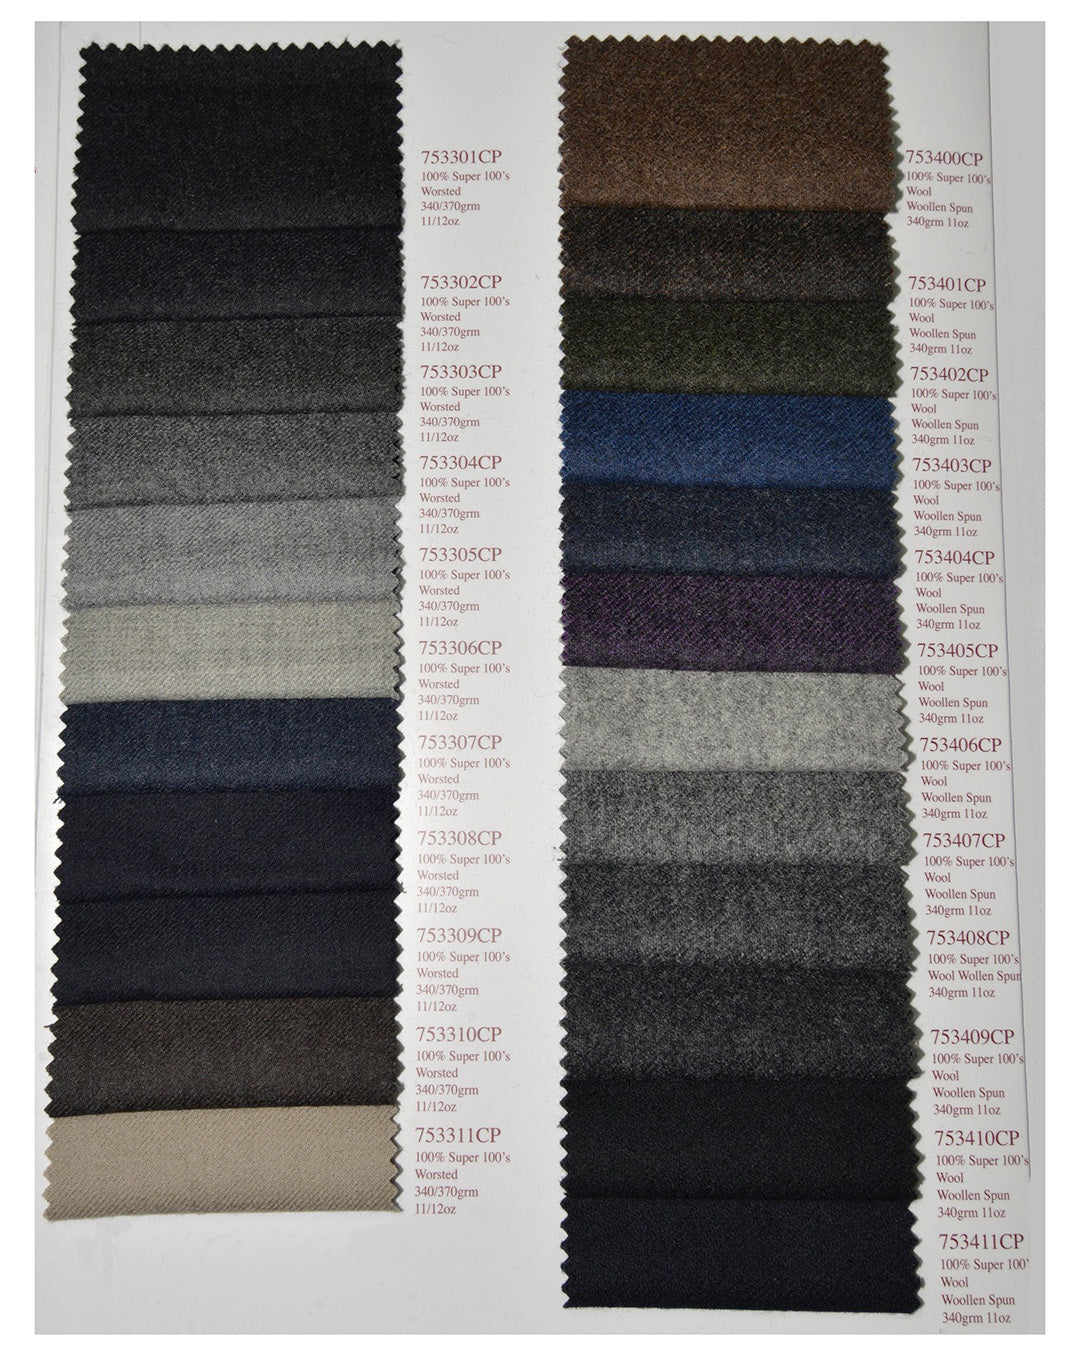 Holland Sherry Classic Worsted Flannel Cream